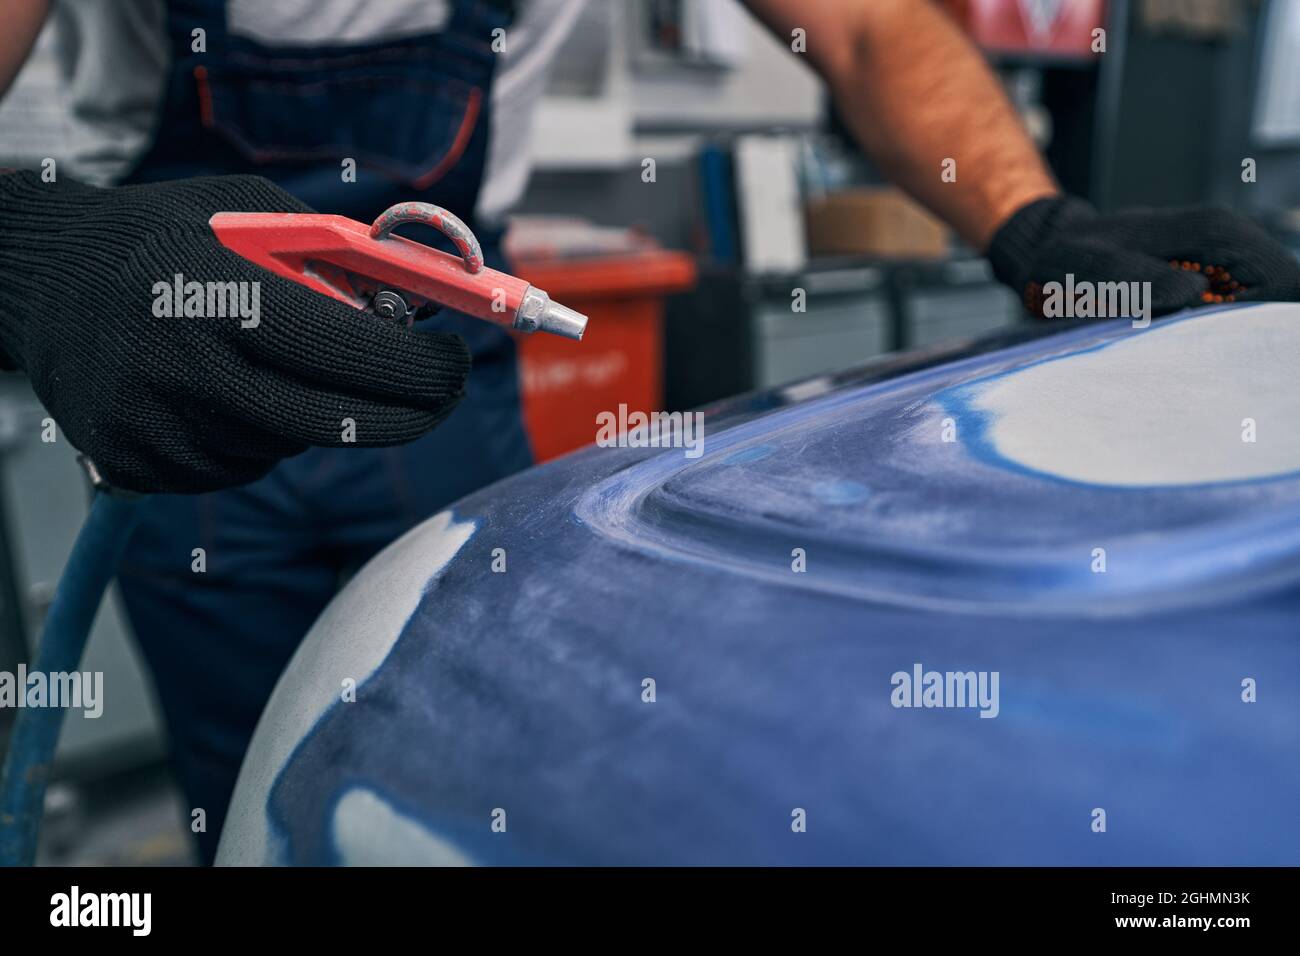 Air blow gun in hand on auto mechanic at work Stock Photo